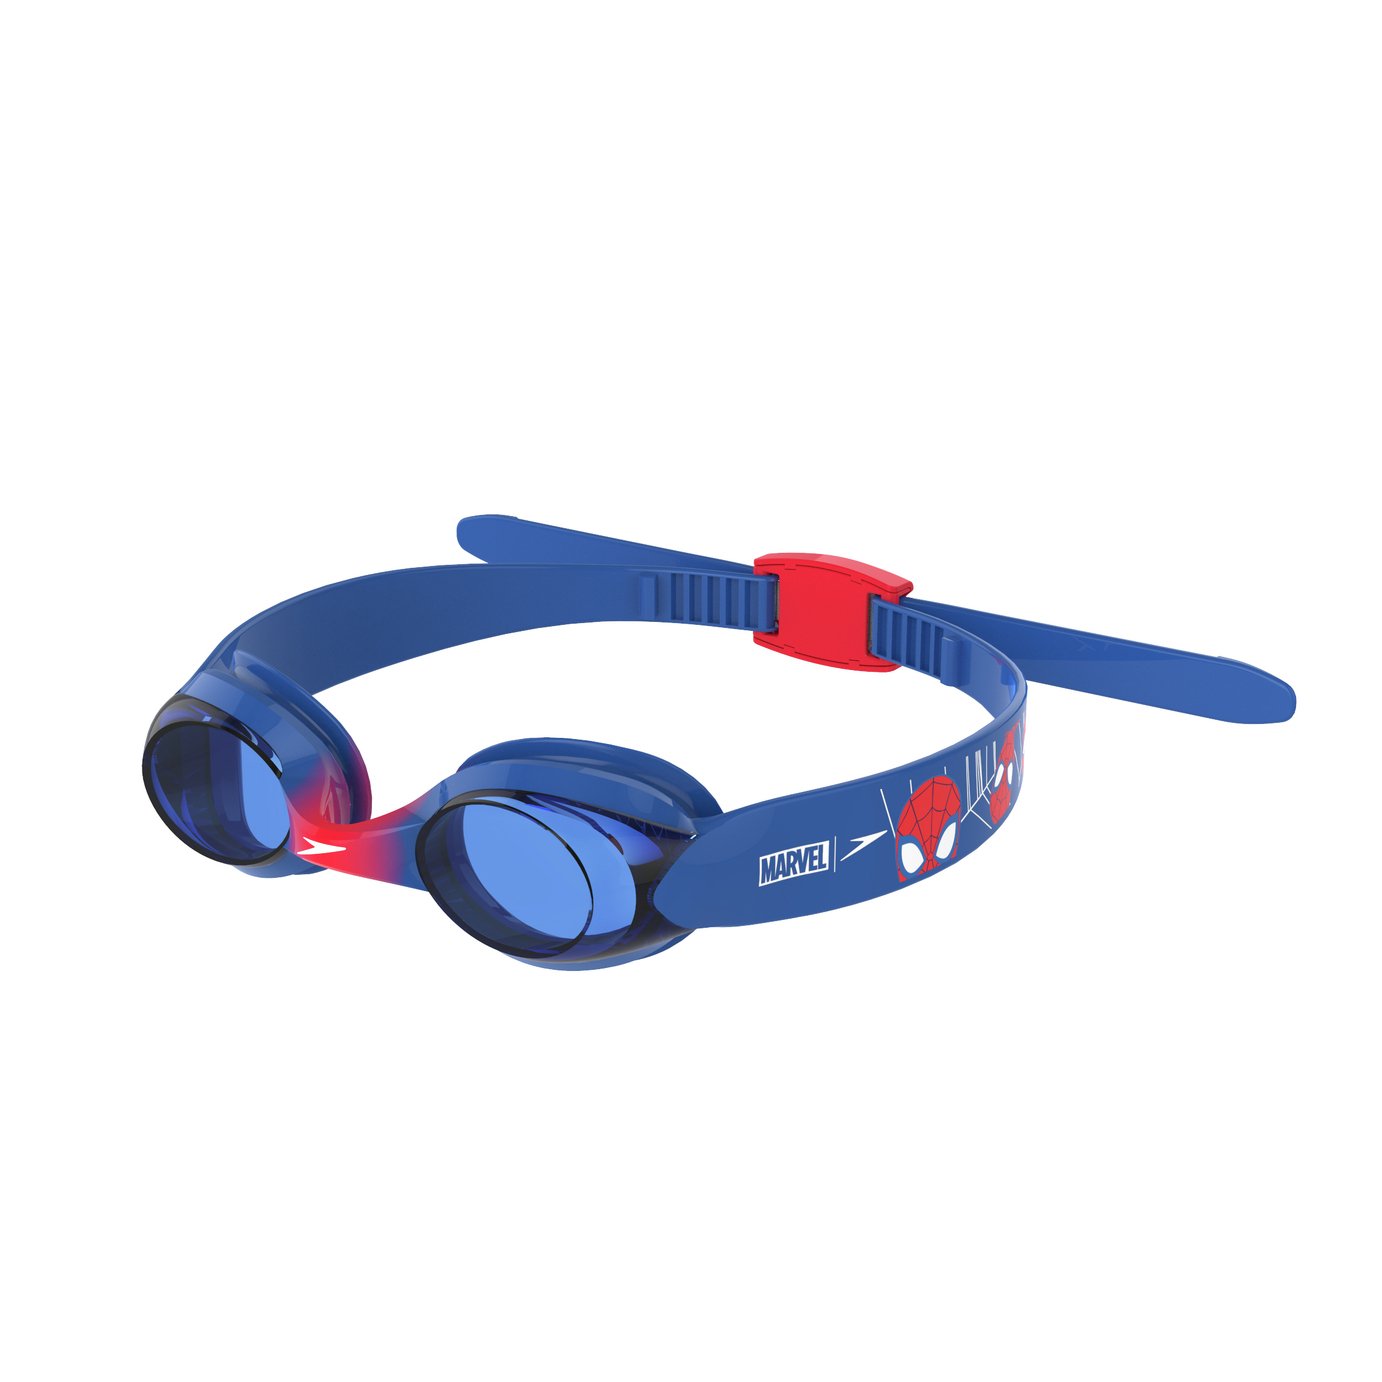 Spiderman Infant Goggles review